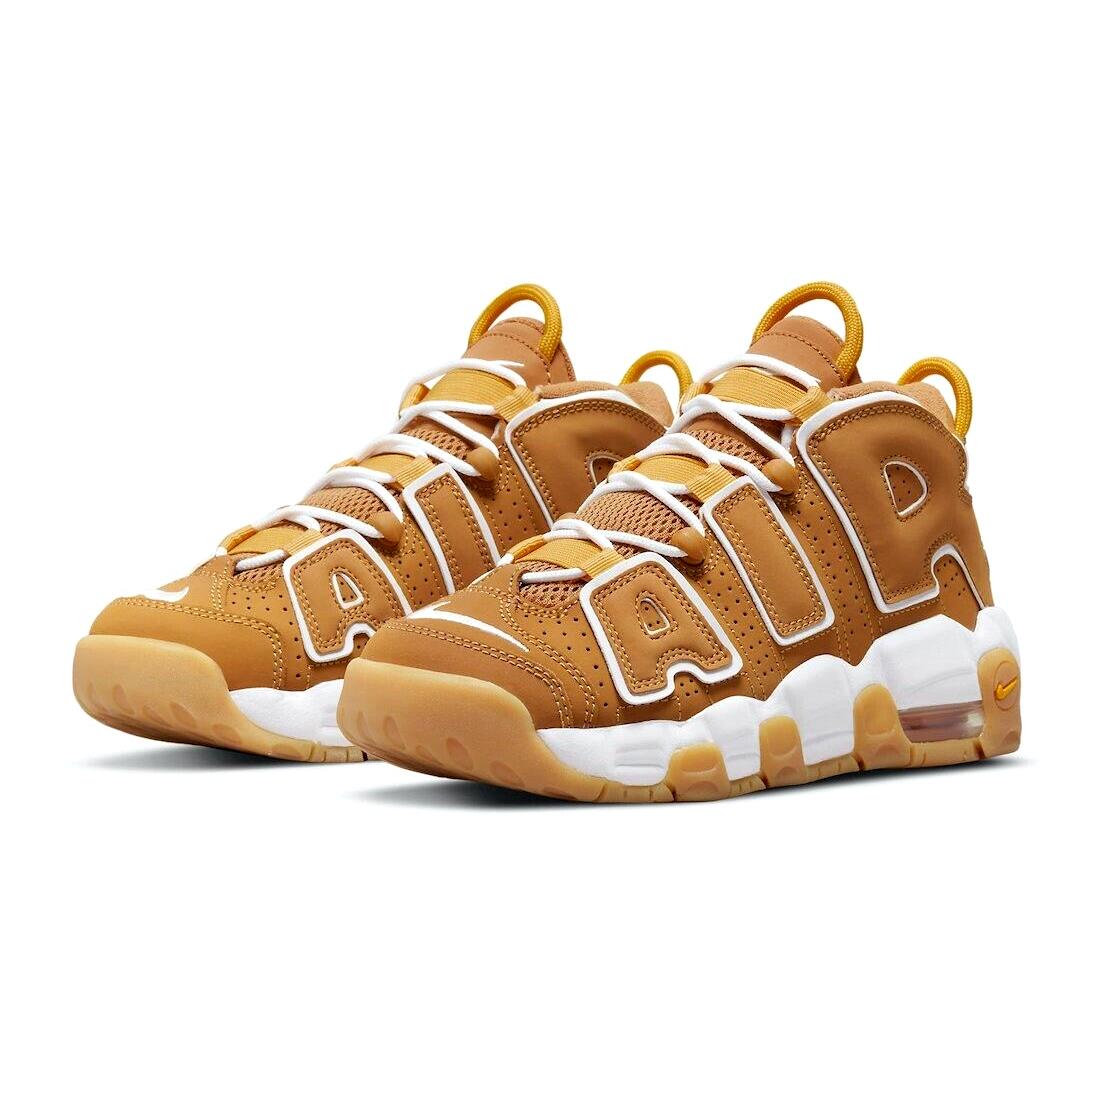 Nike Air More Uptempo Youth Size 4.5Y Sneaker Shoes DQ4713 700